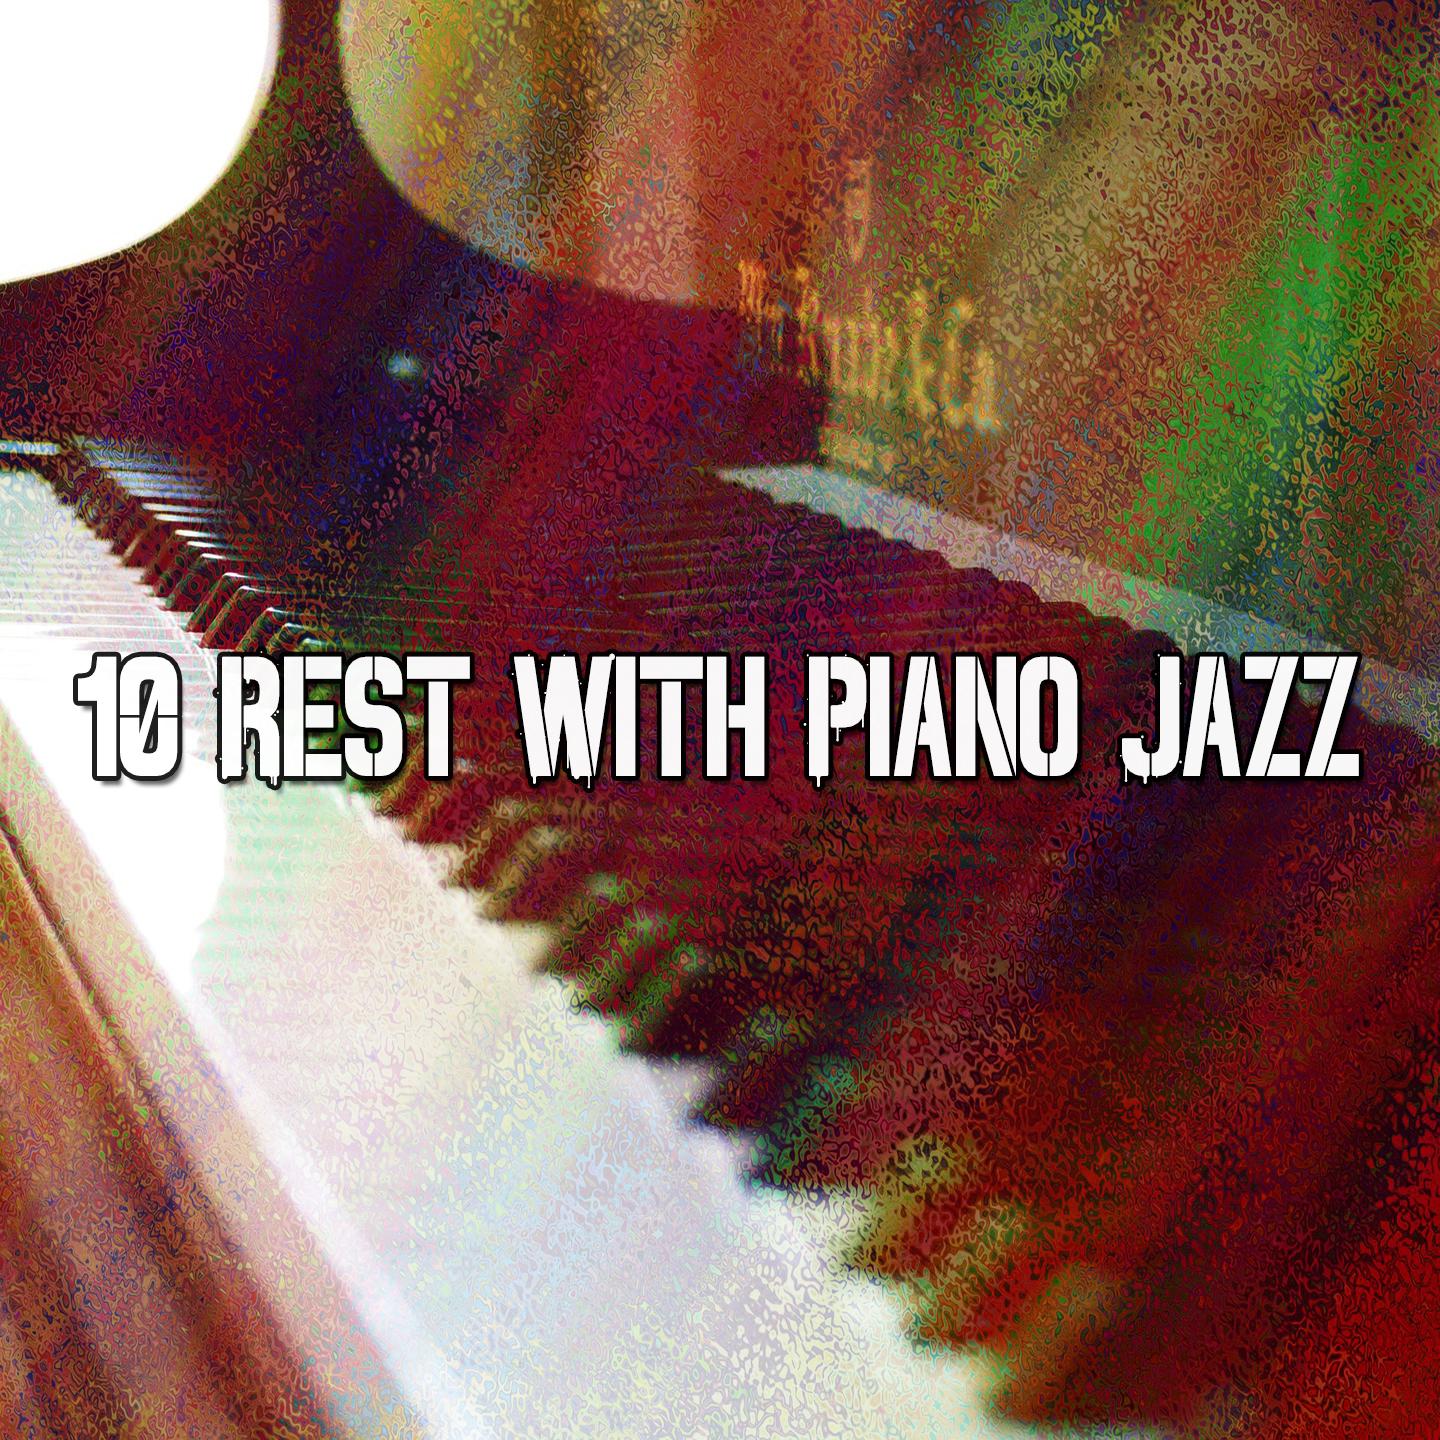 10 Rest with Piano Jazz